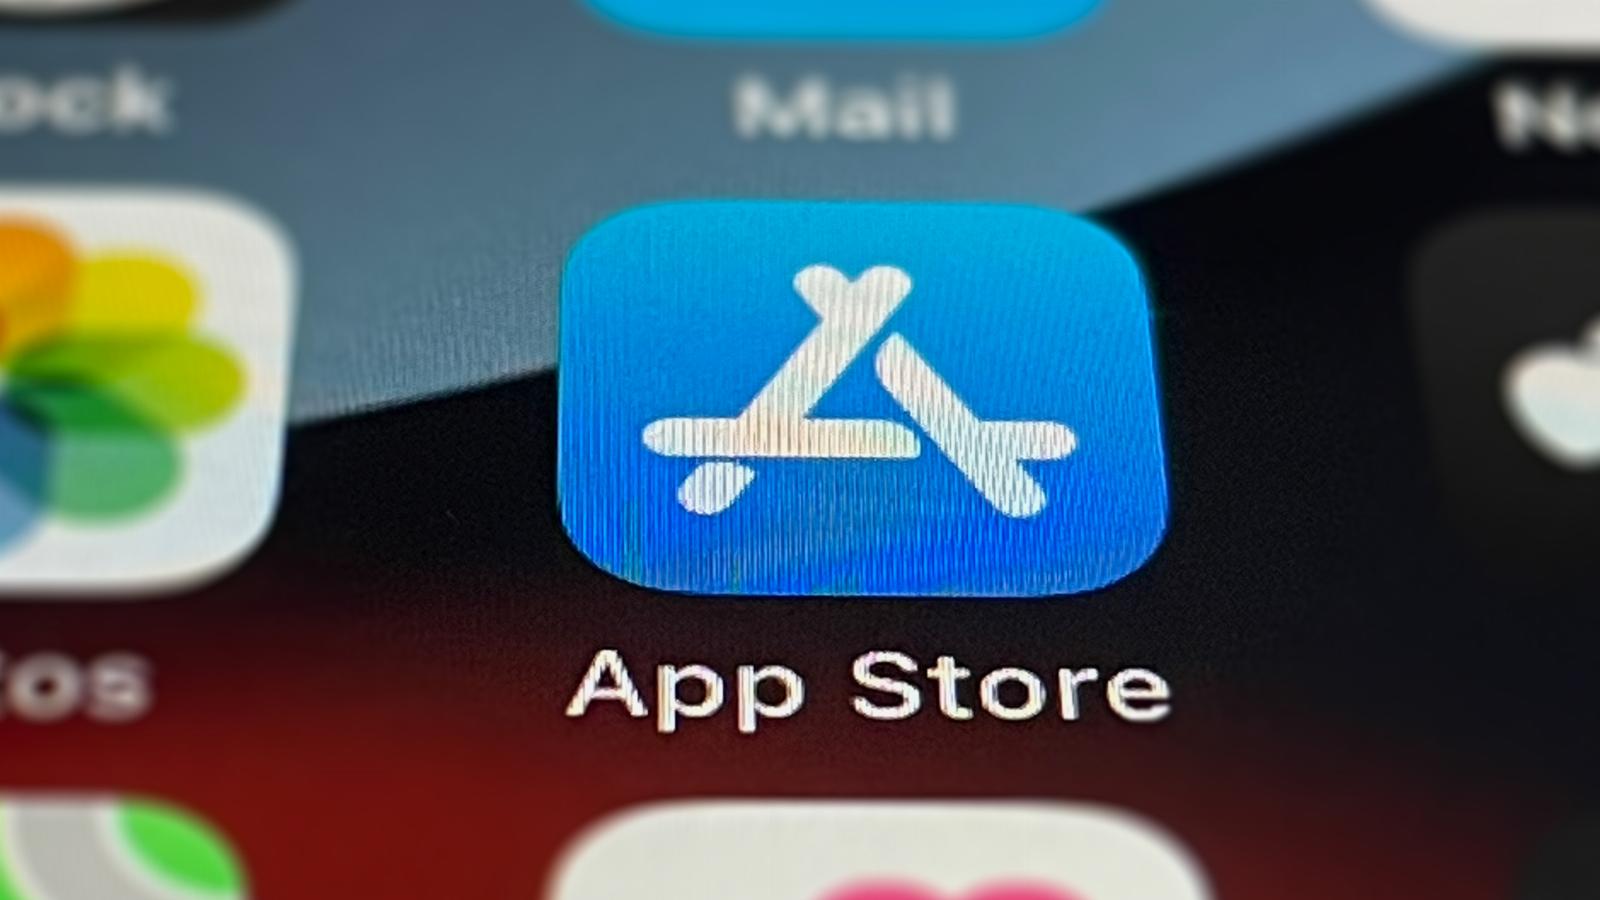 Apple’s App Store tightens up on user privacy with new rules for app developers